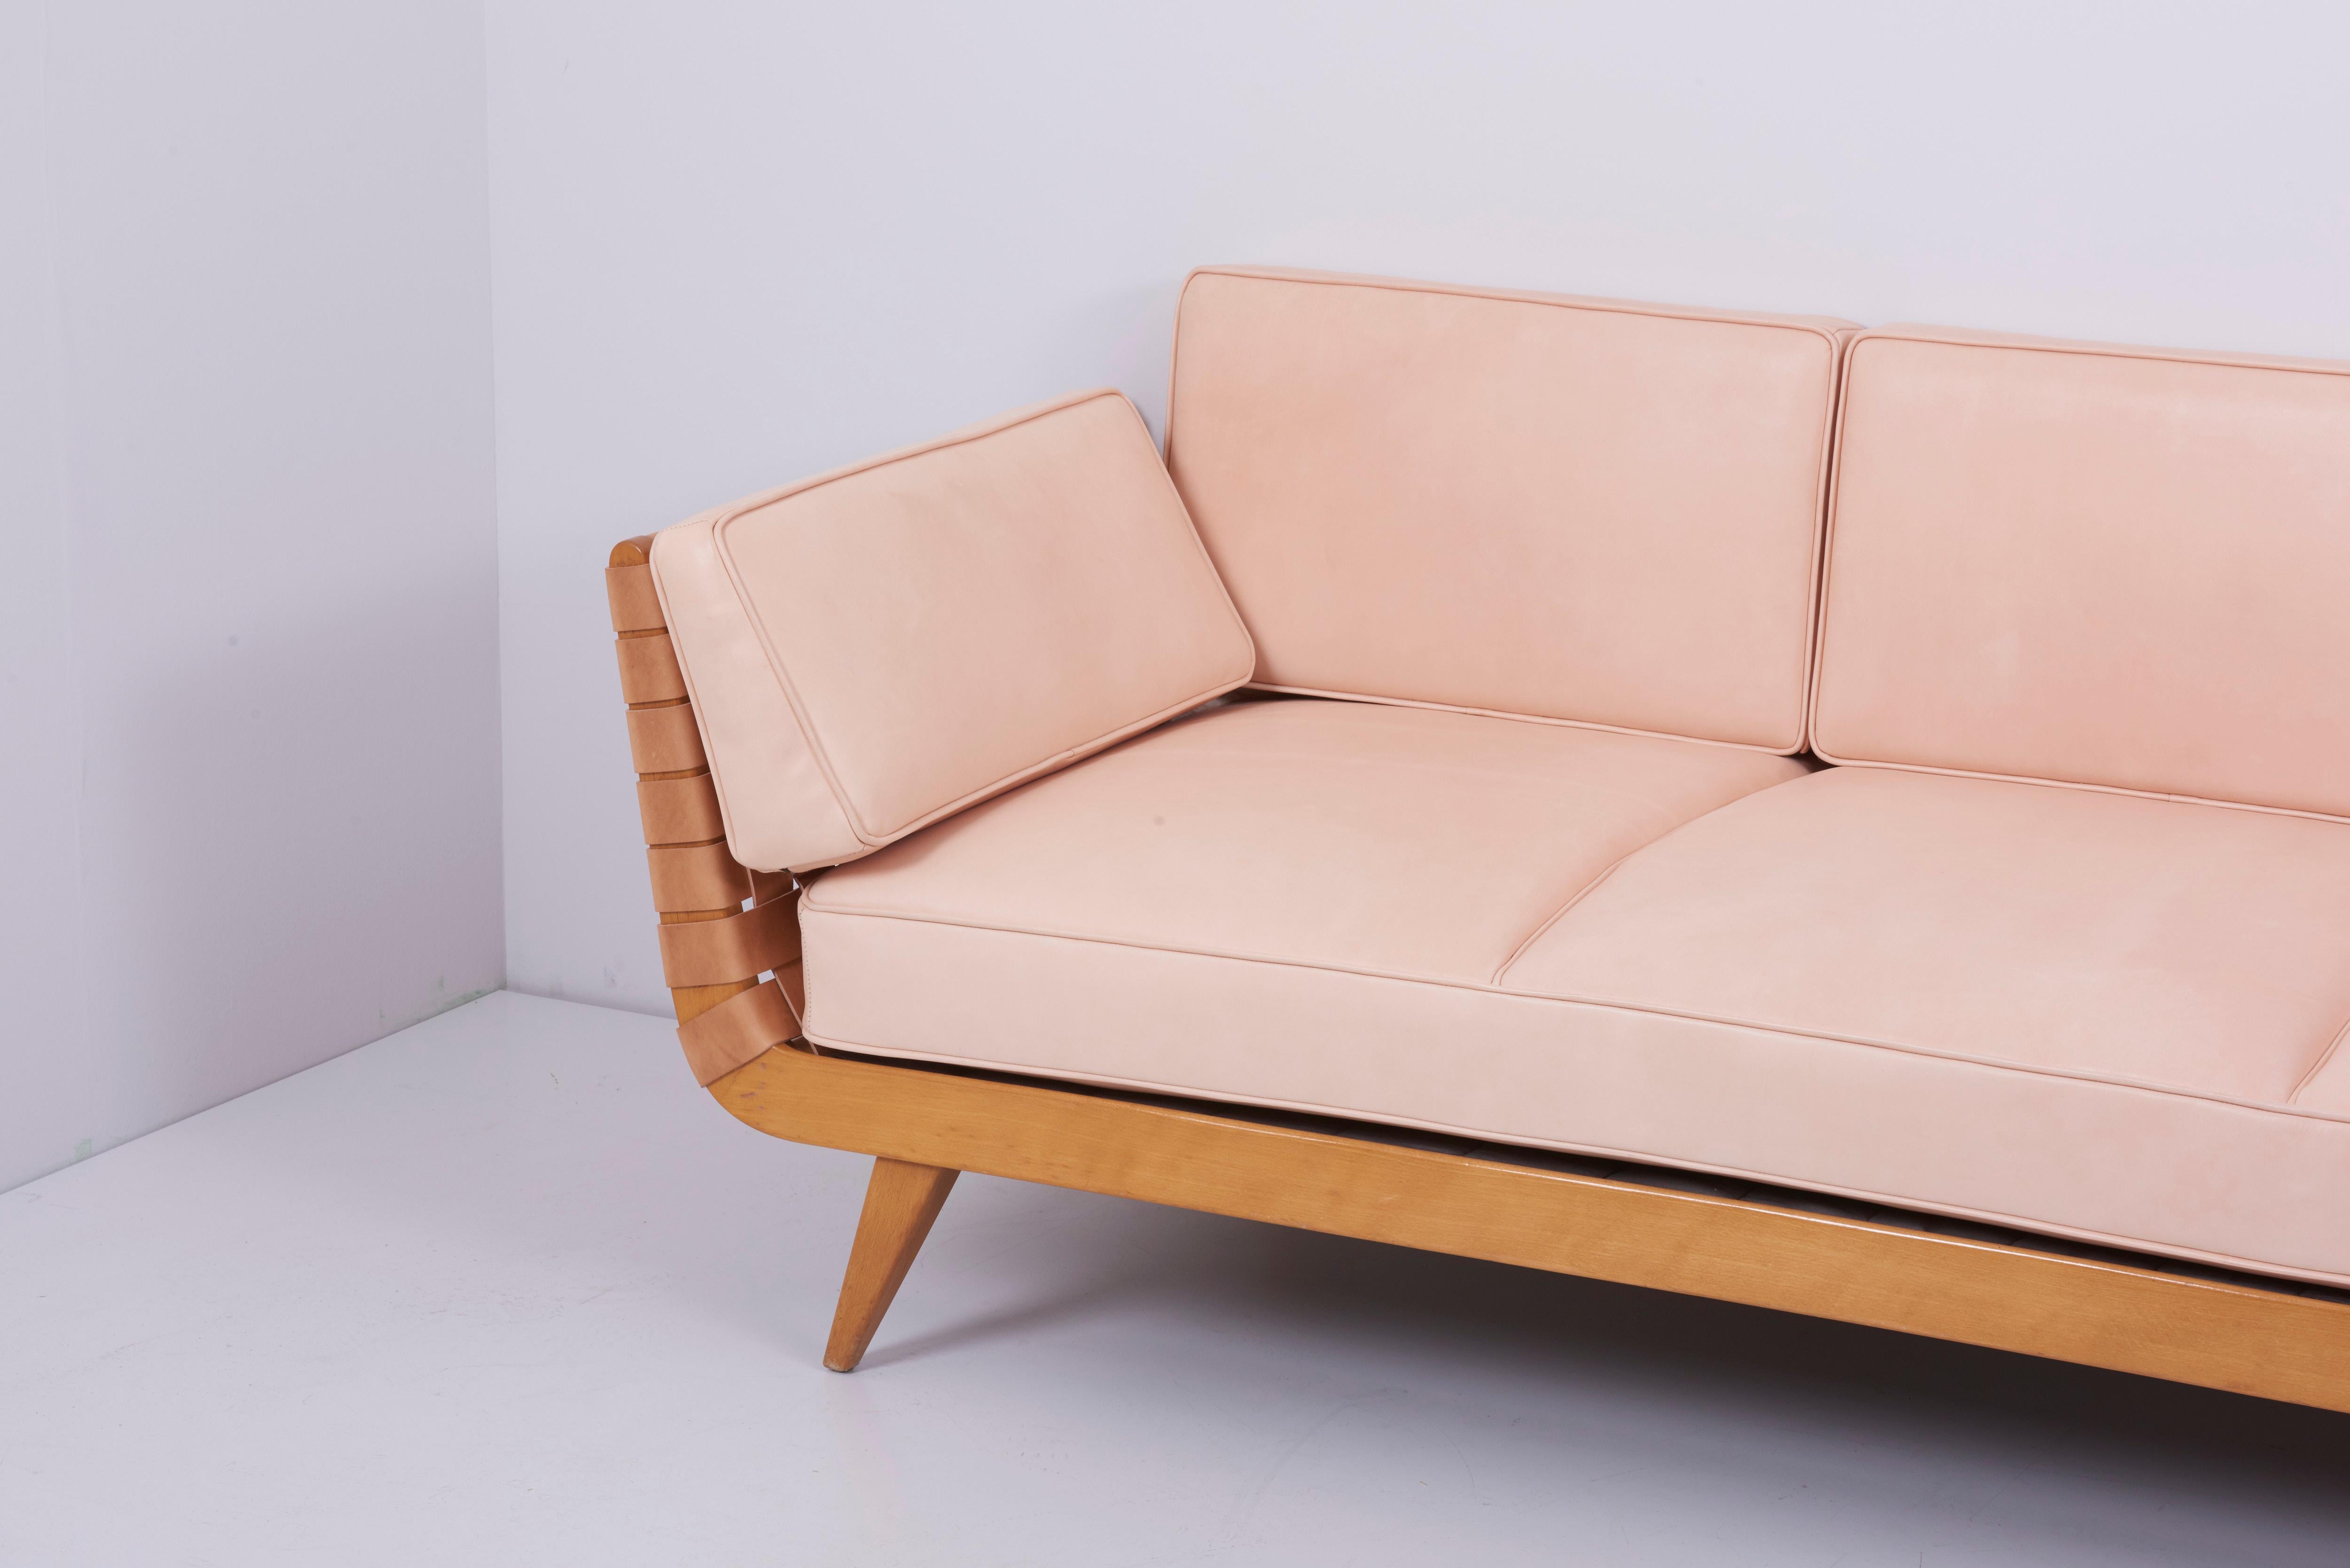 Newly Upholstered Daybed by Jens Risom for Walter Knoll 1950s in Leather 1